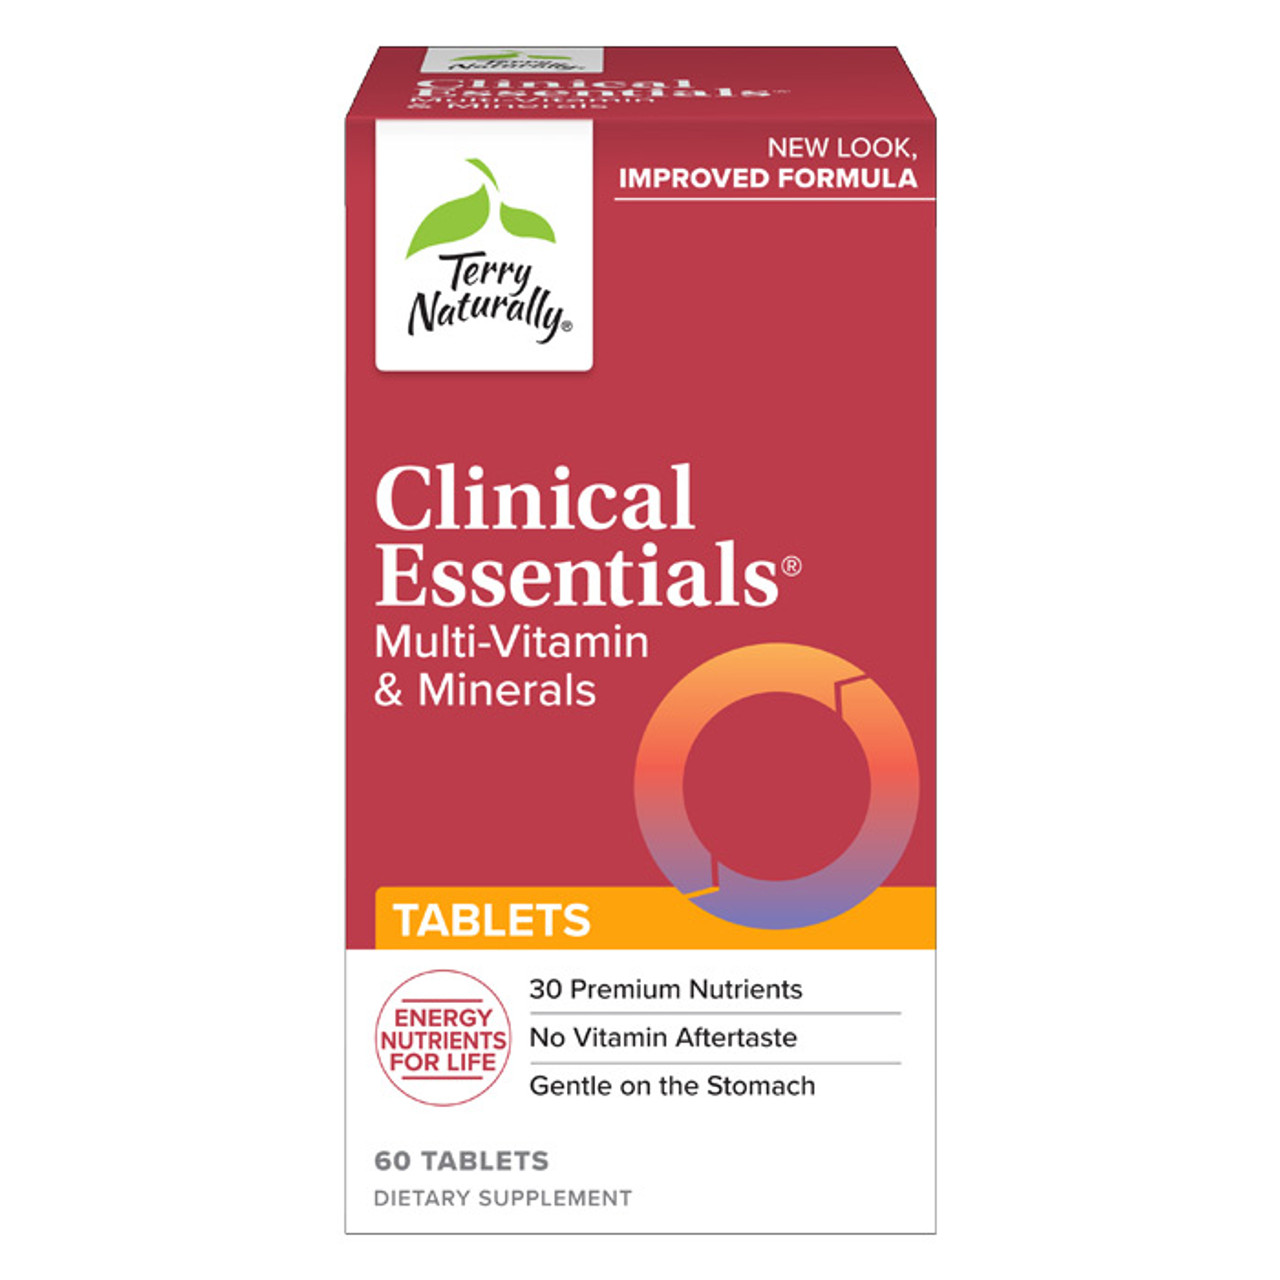 Terry Naturally Clinical Essentials Multi-Vitamin and Minerals Picture